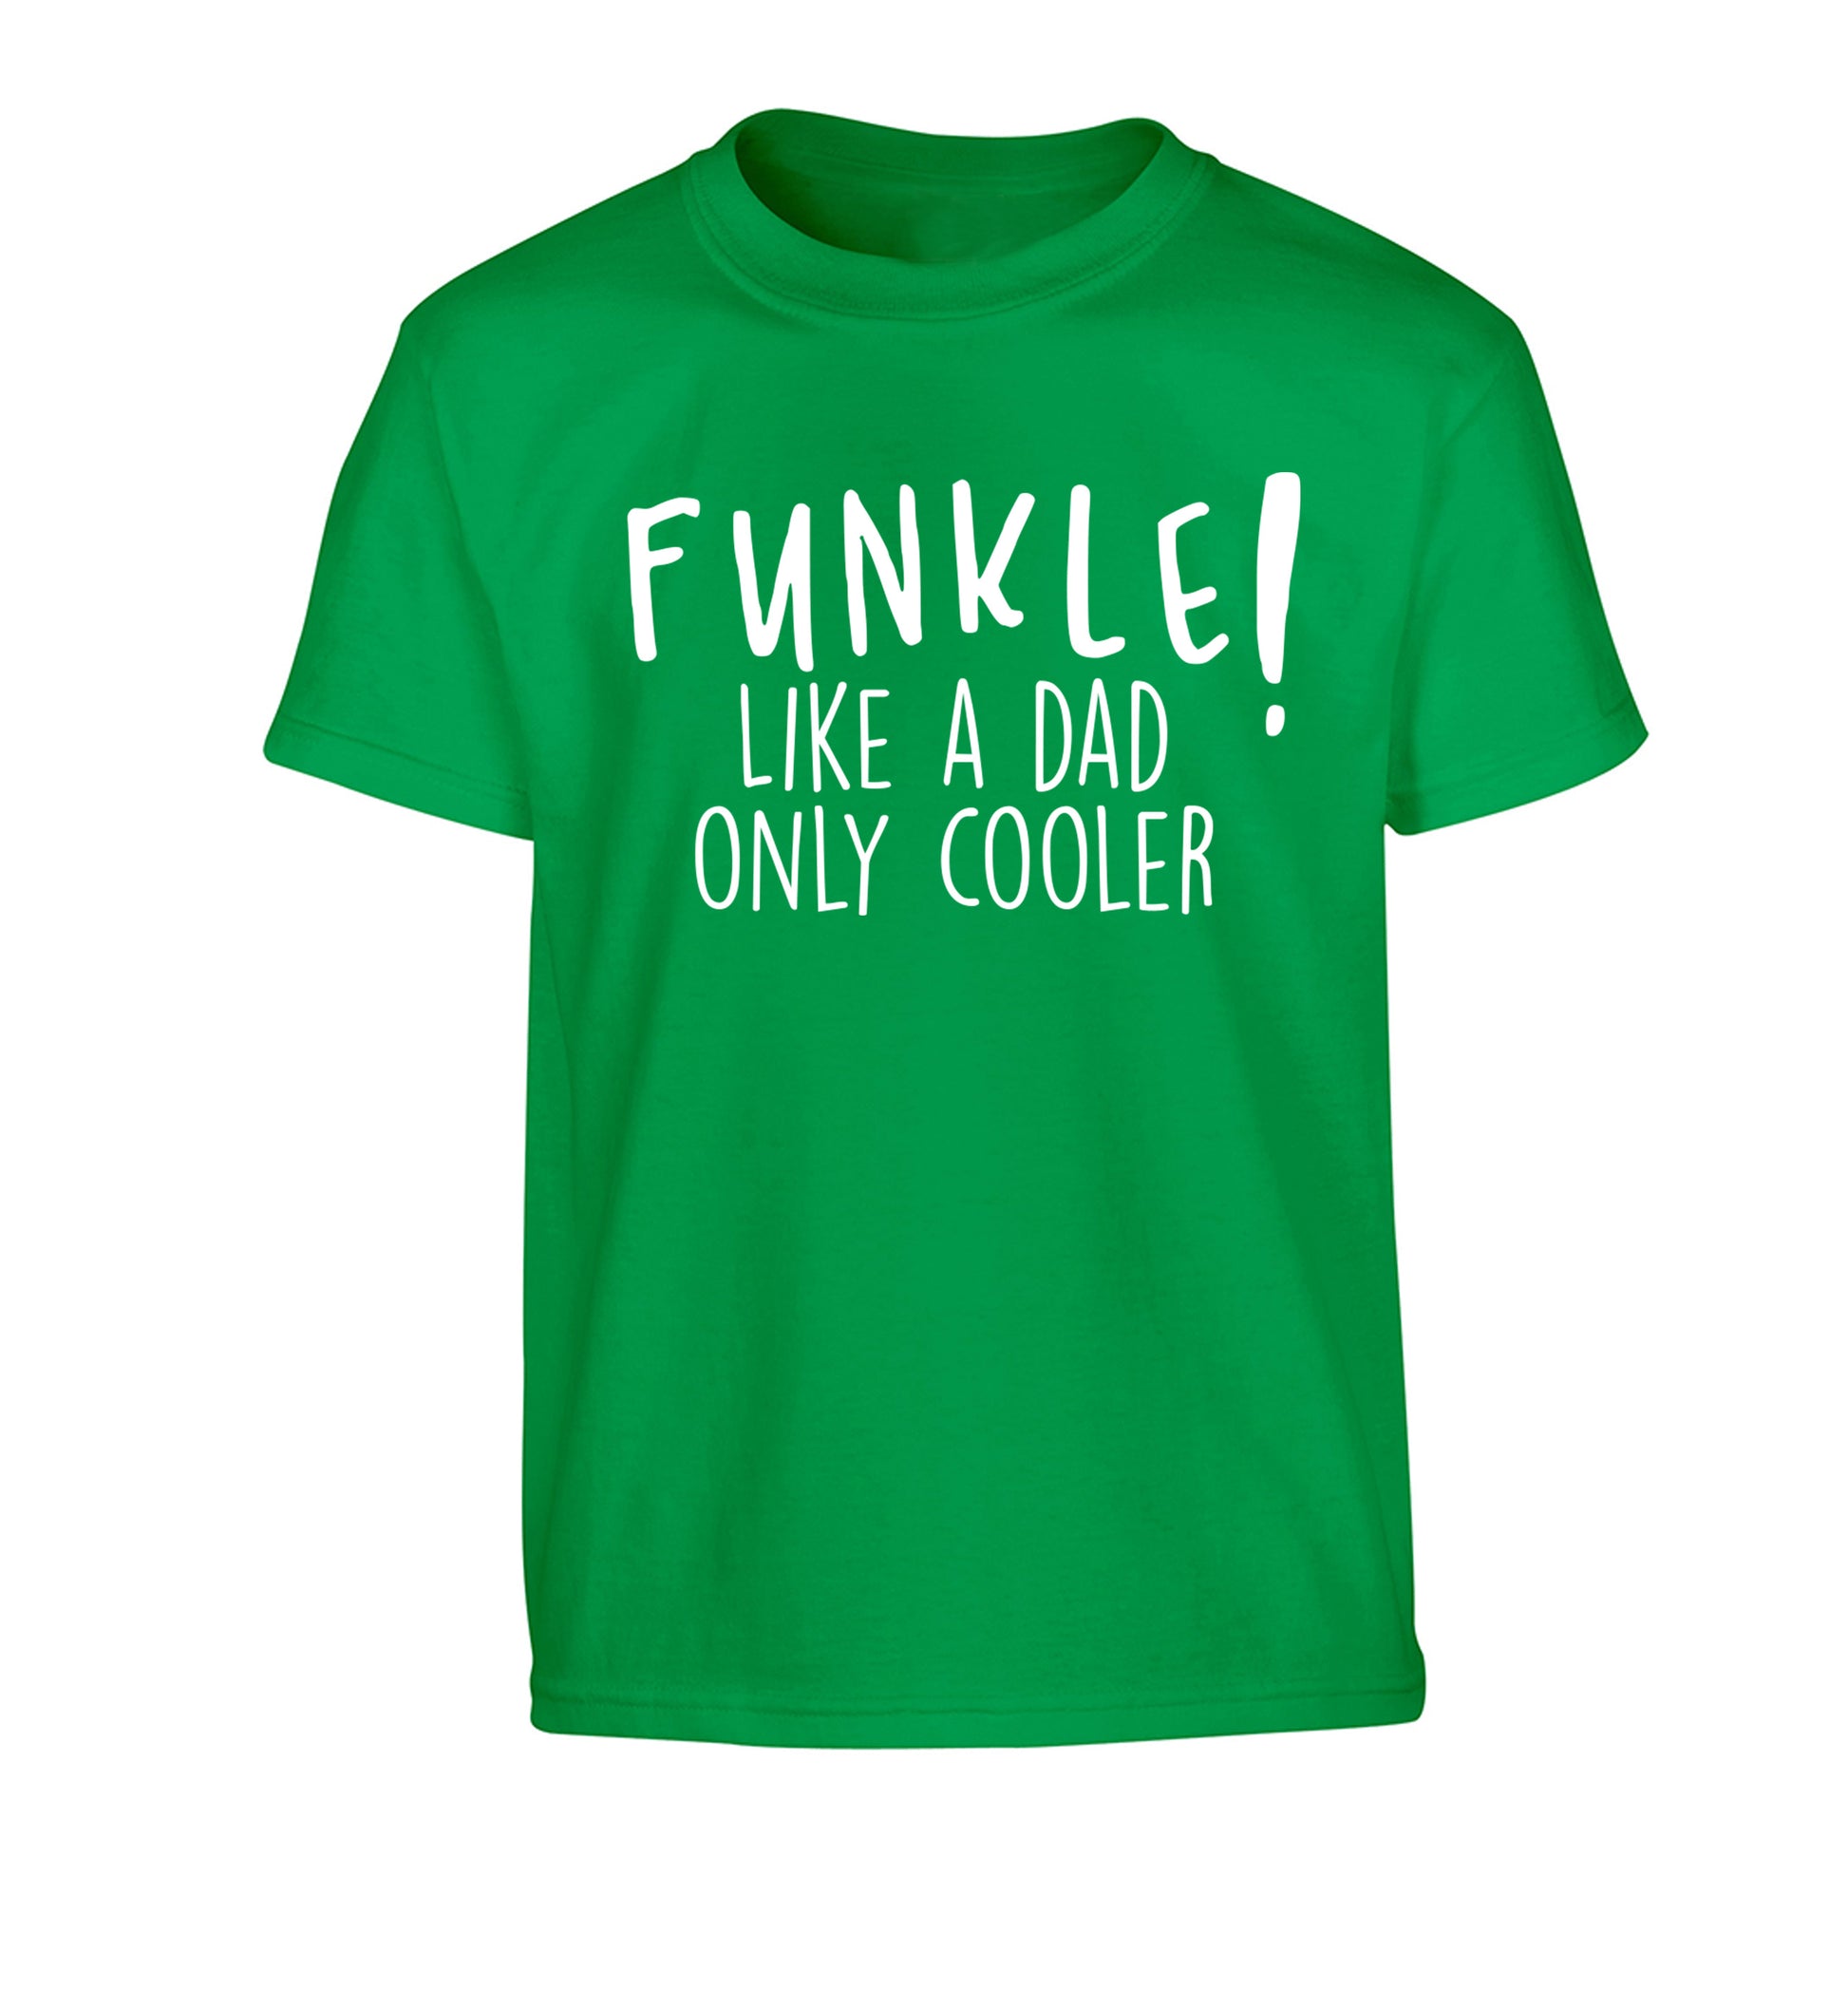 Funkle Like a Dad Only Cooler Children's green Tshirt 12-13 Years